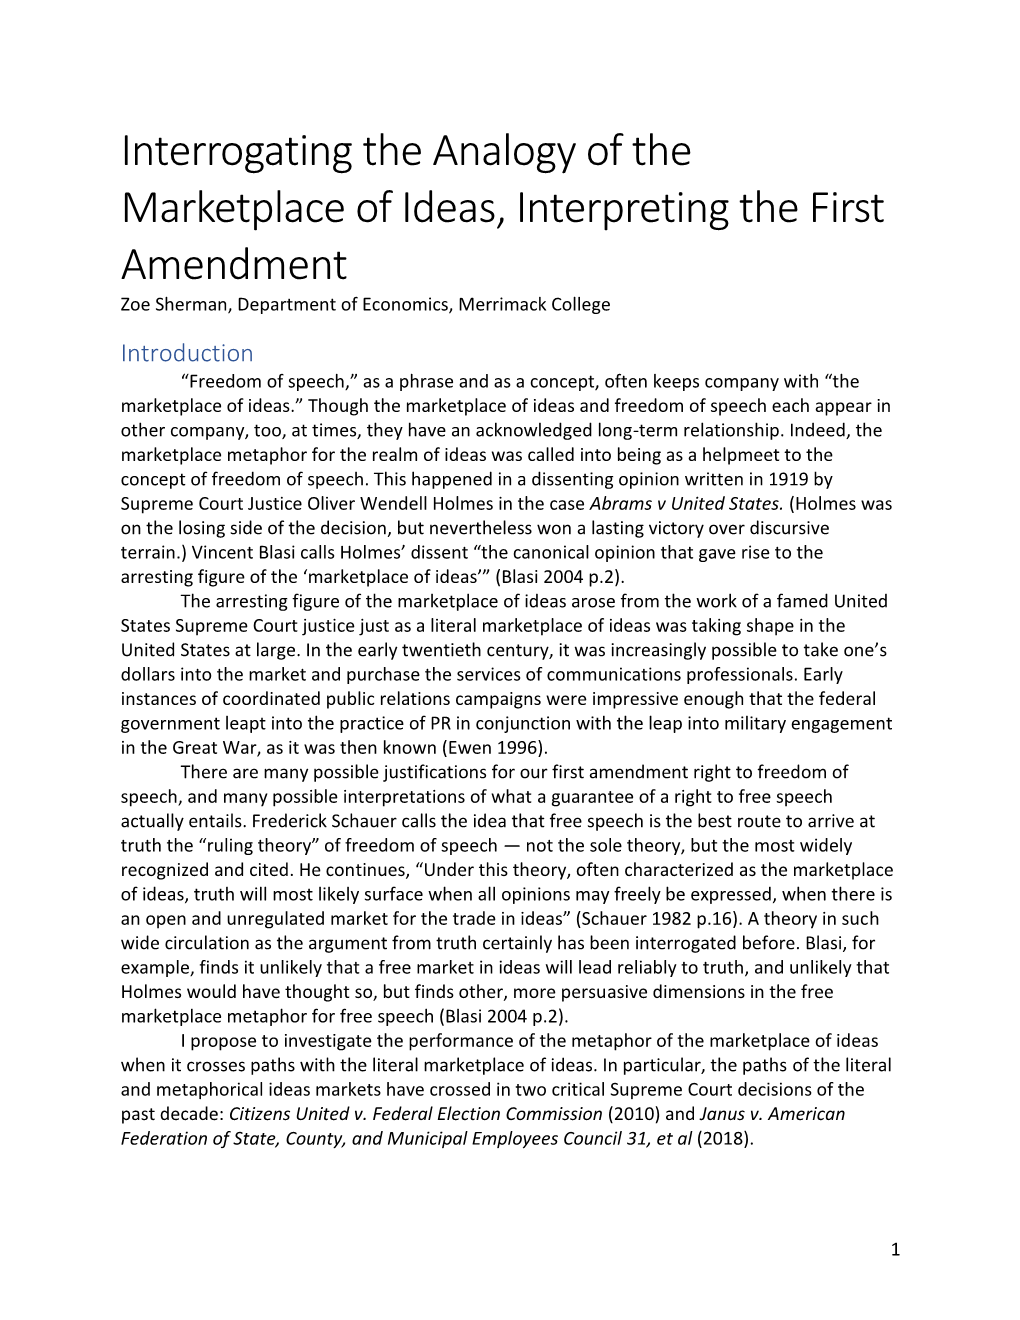 Interrogating the Analogy of the Marketplace of Ideas, Interpreting